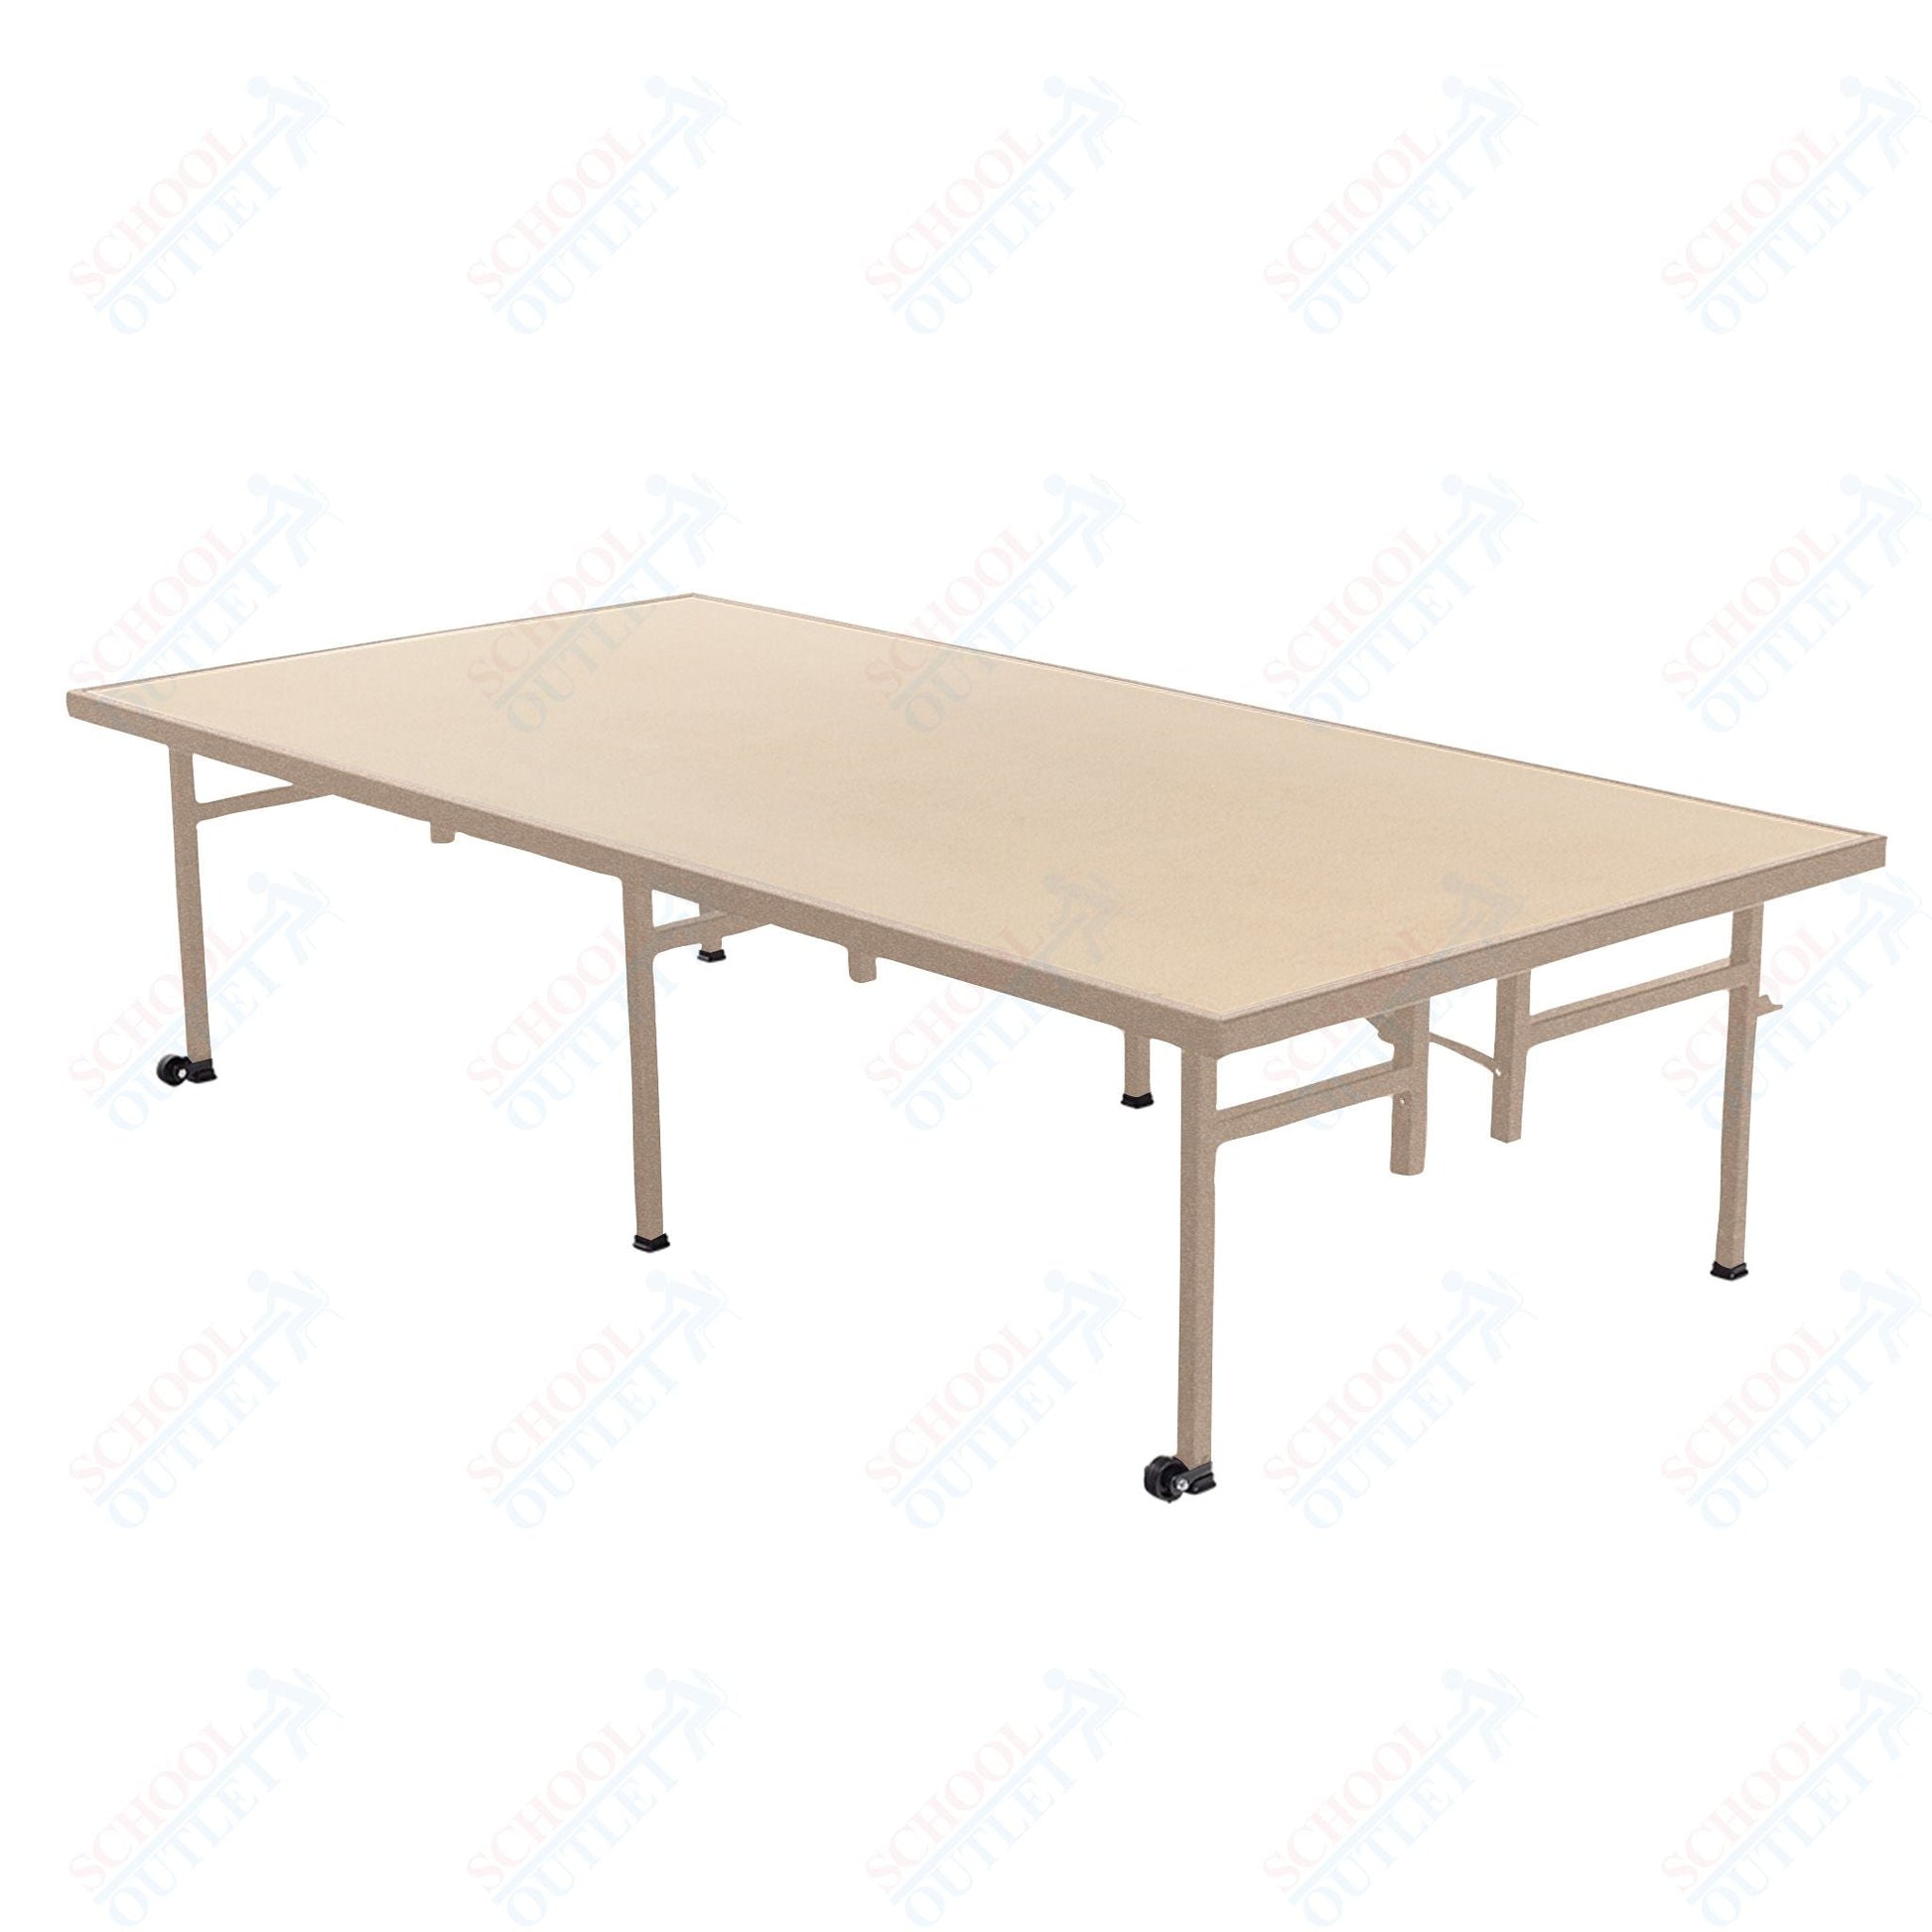 AmTab Fixed Height Stage - Hardboard Top - 48"W x 96"L x 16"H (AmTab AMT - ST4816H) - SchoolOutlet